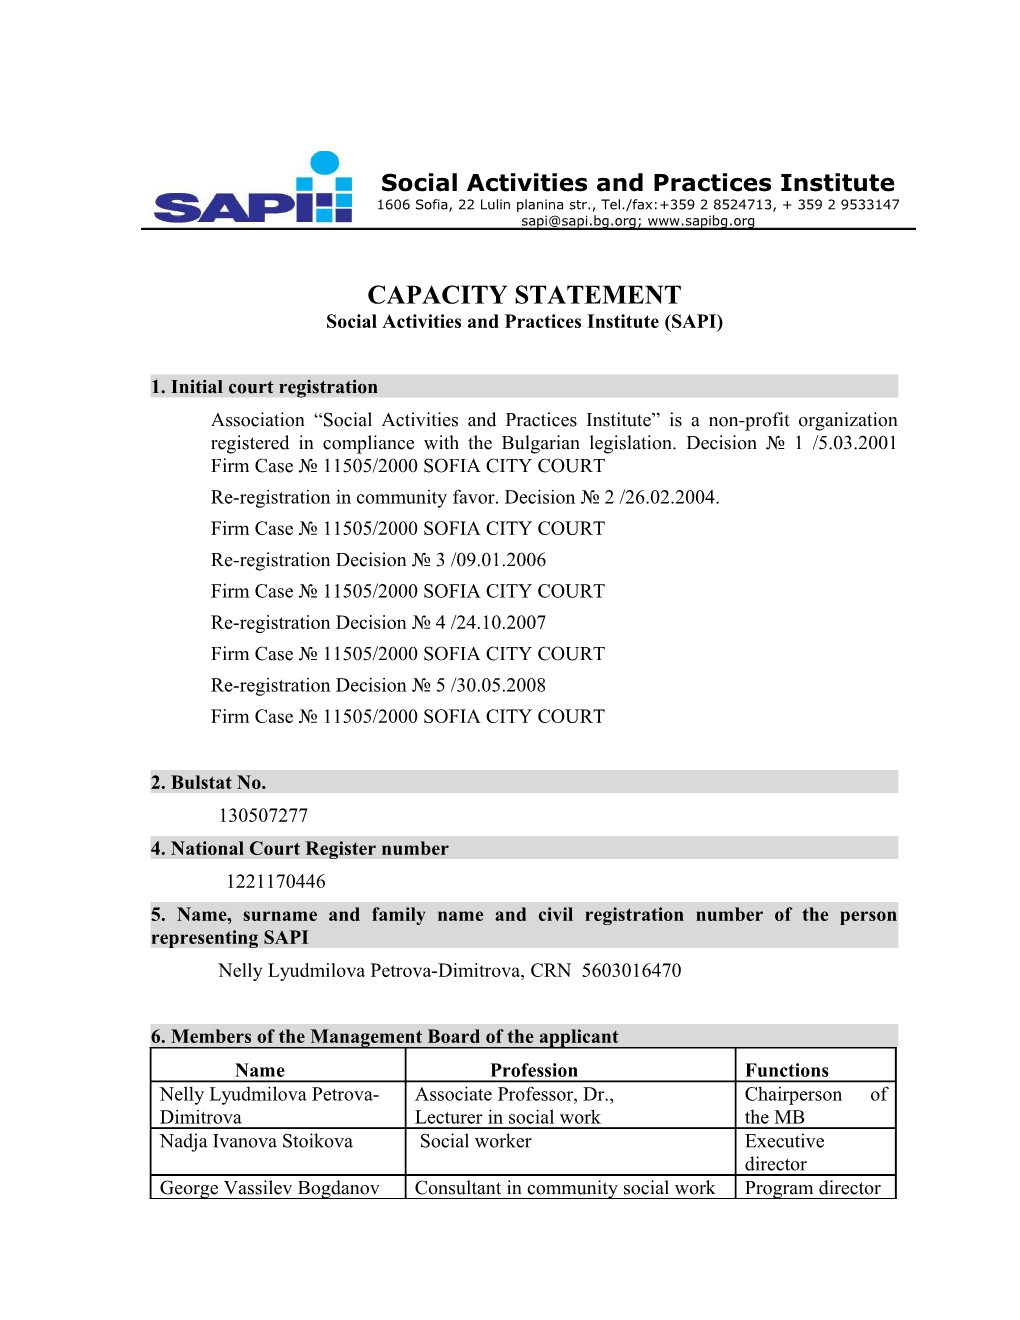 Social Activities and Practices Institute (SAPI)